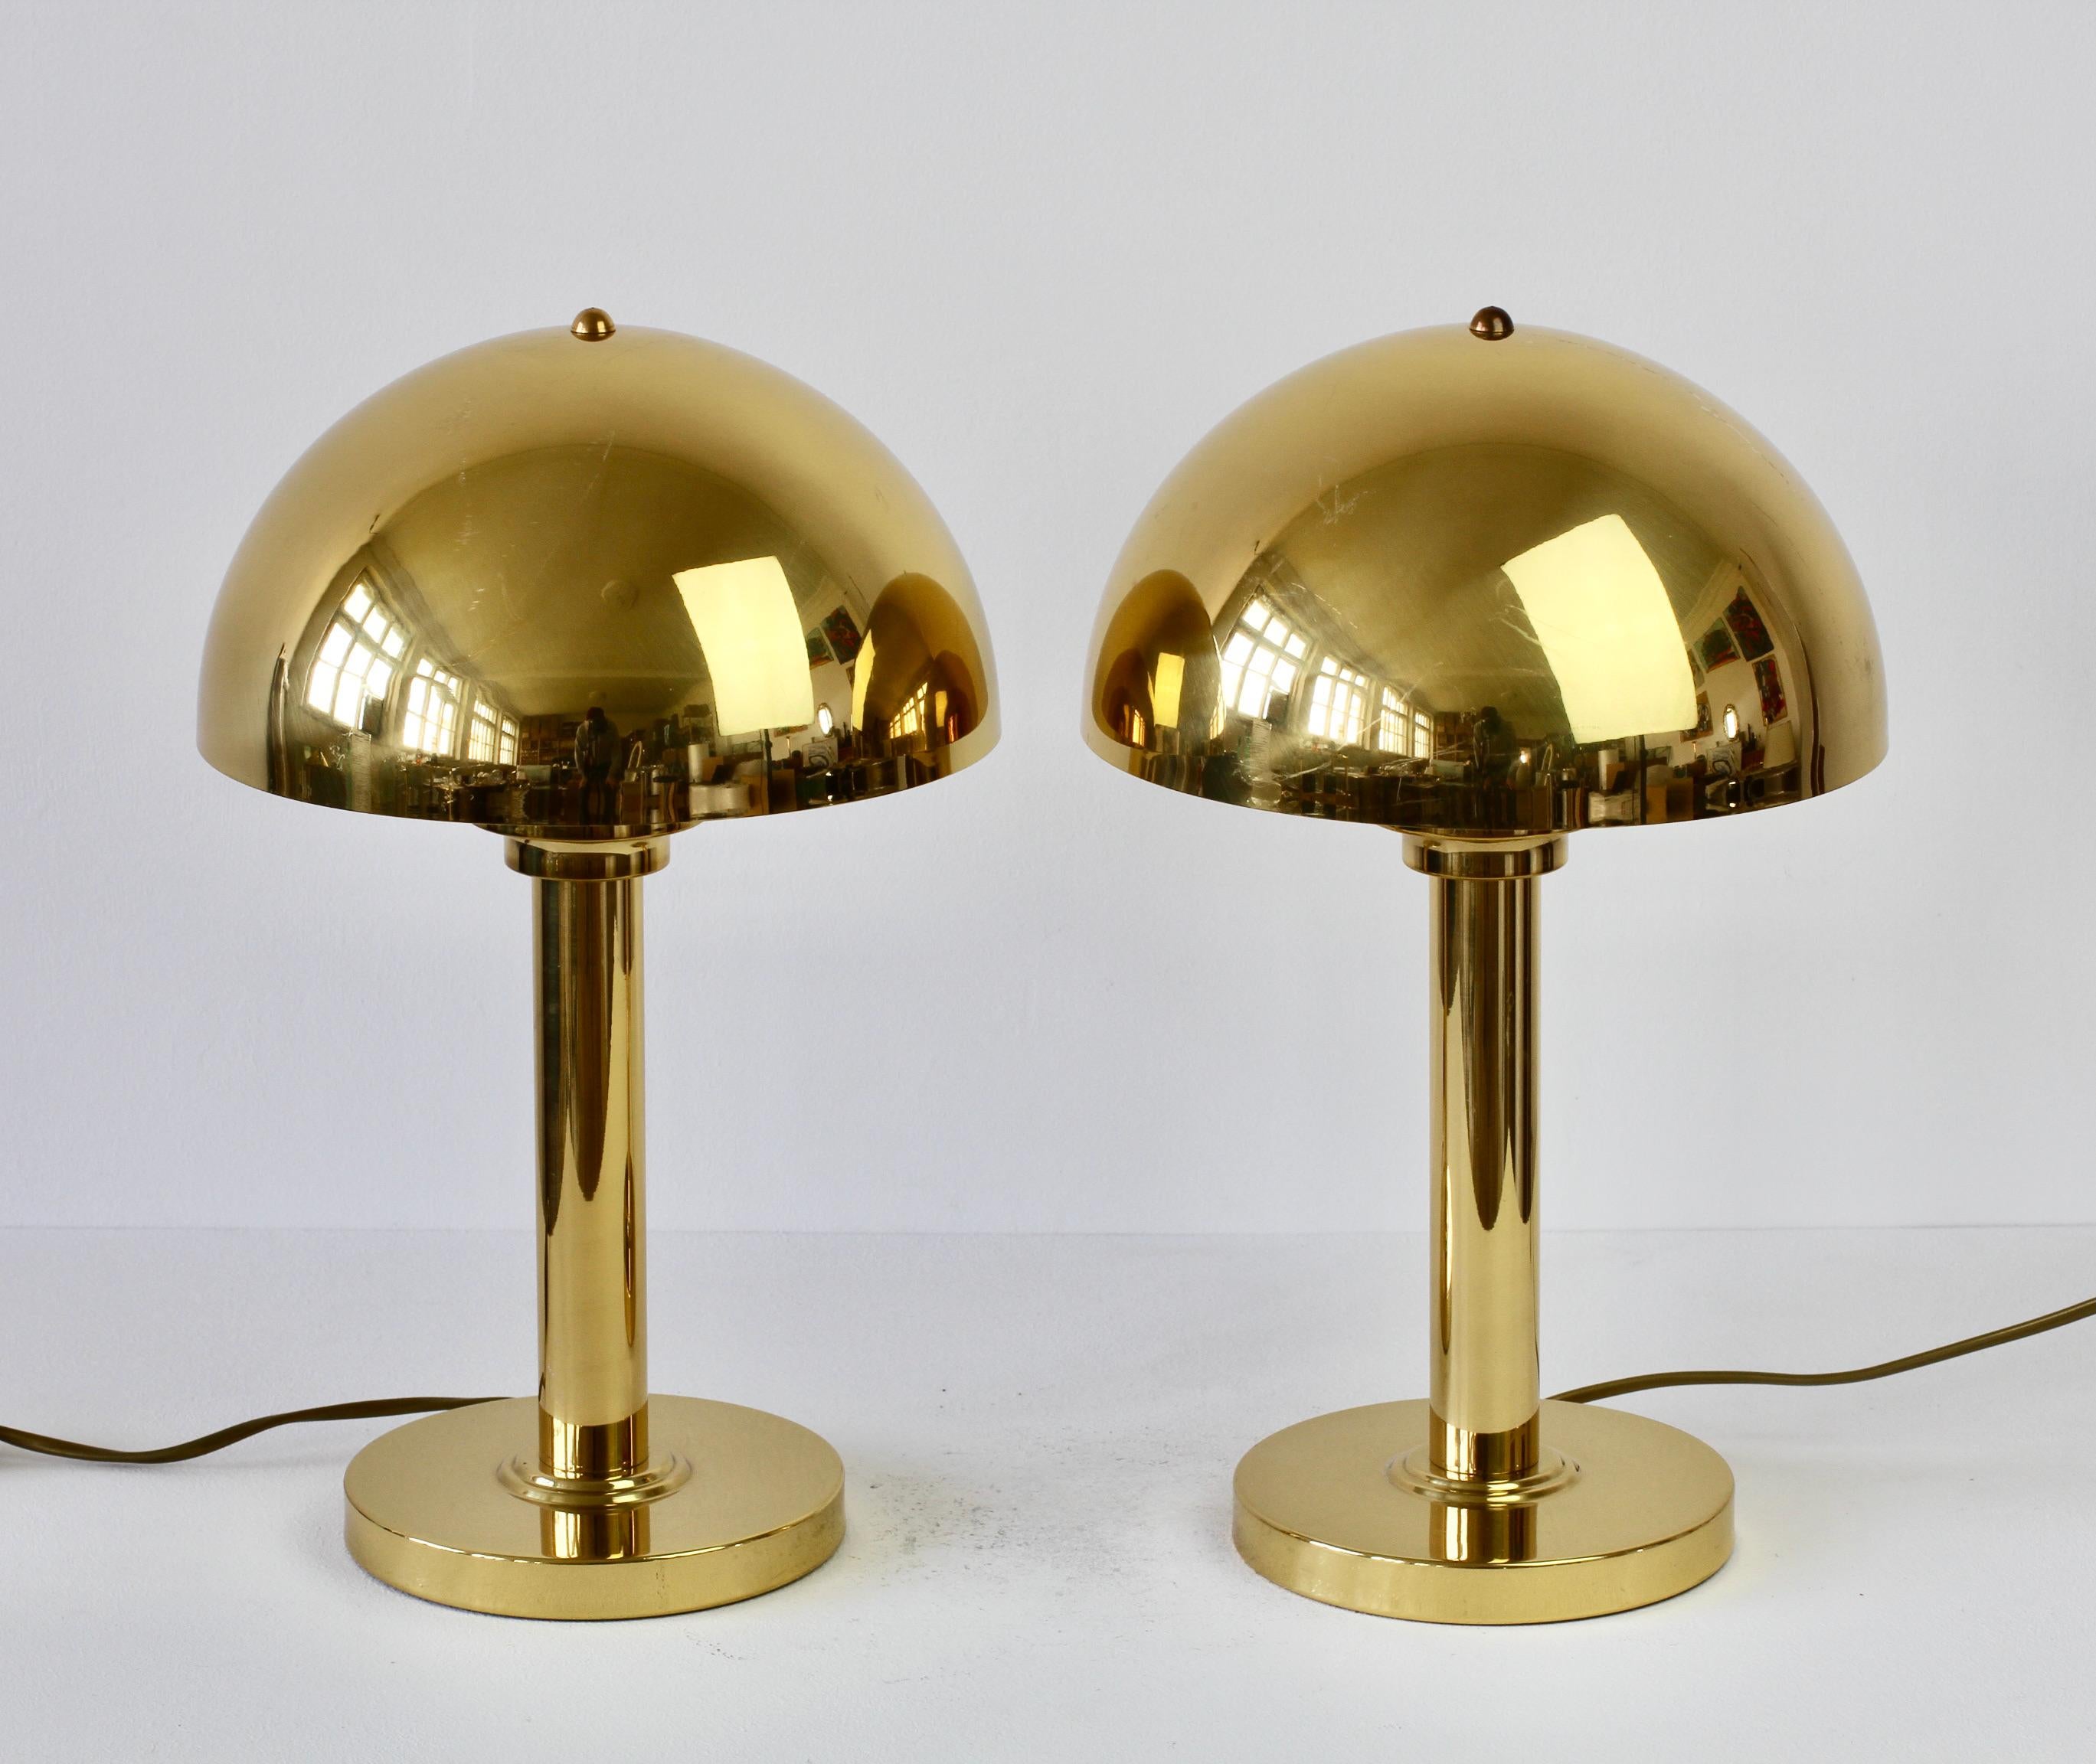 Brushed Pair of Vintage Modernist Art Deco Style Polished Brass Table Lamps